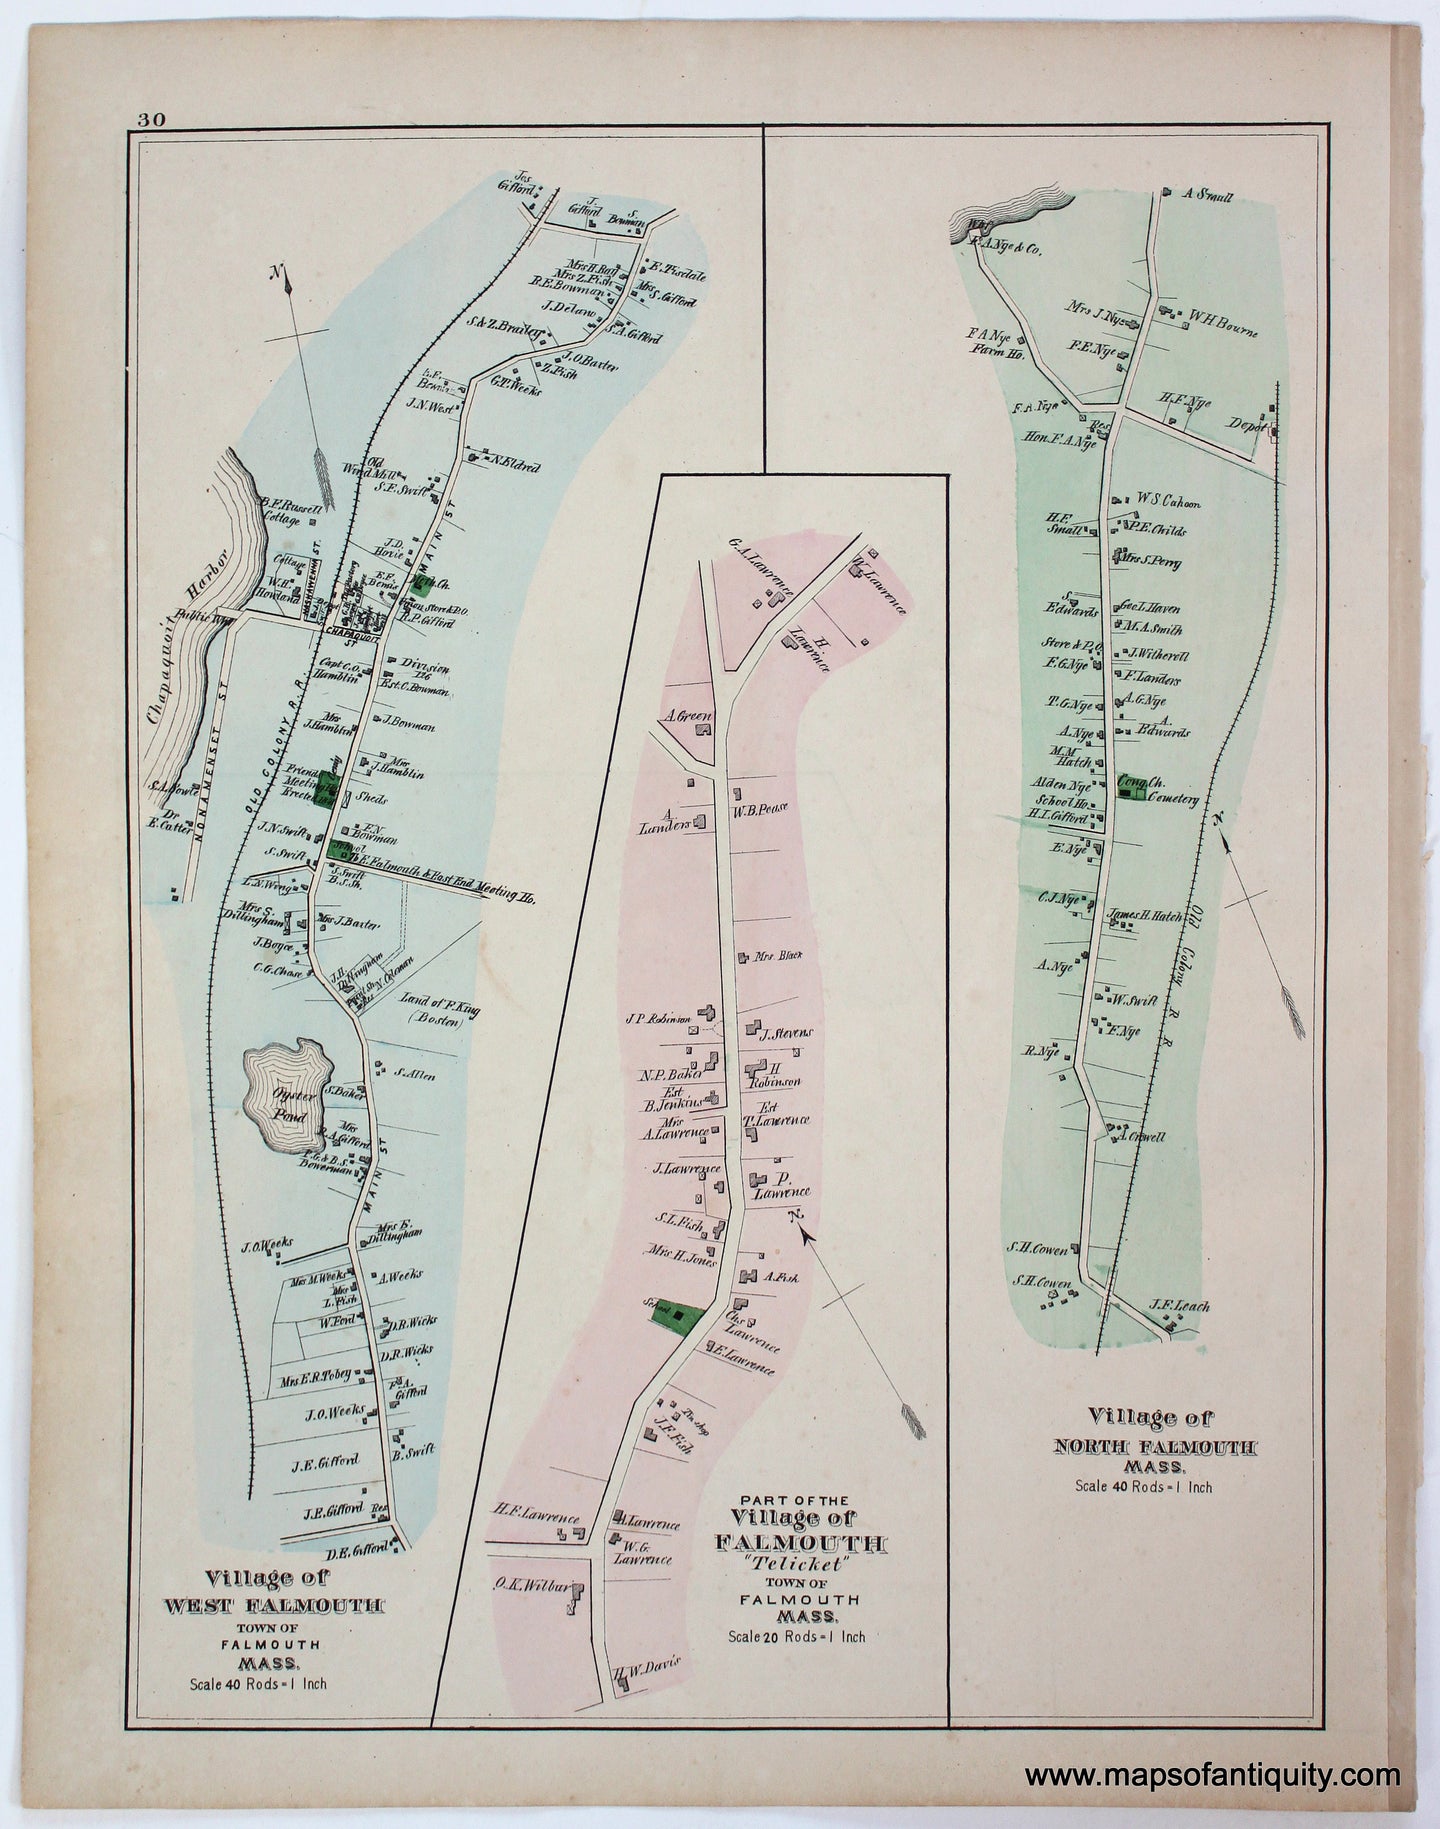 Three street maps, oriented vertically, of Village of West Falmouth, Part of the Village of Falmouth- Teaticket, Village of North Falmouth. Colored in light blue, light pink, and light green (original antique colors) with brighter greens for parks and cemeteries. 